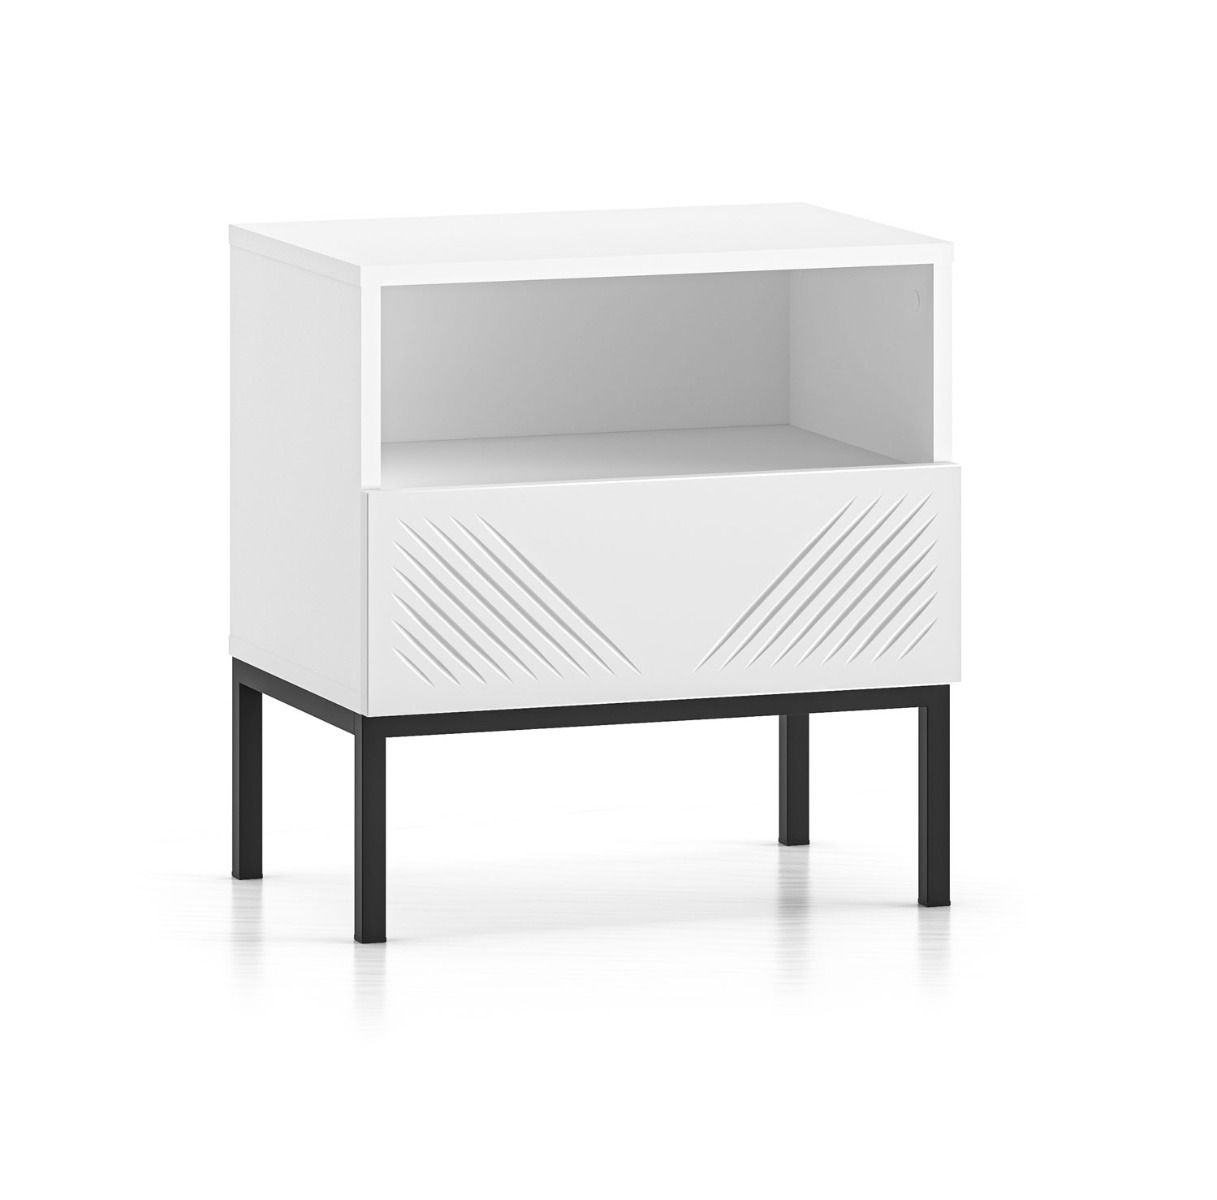 Modern bedside cabinet Taos 19, color: white matt, push-to-open function, dimensions: 53 x 50 x 34 cm, legs: black, timeless, with 1 drawer and 1 compartment, soft-close system